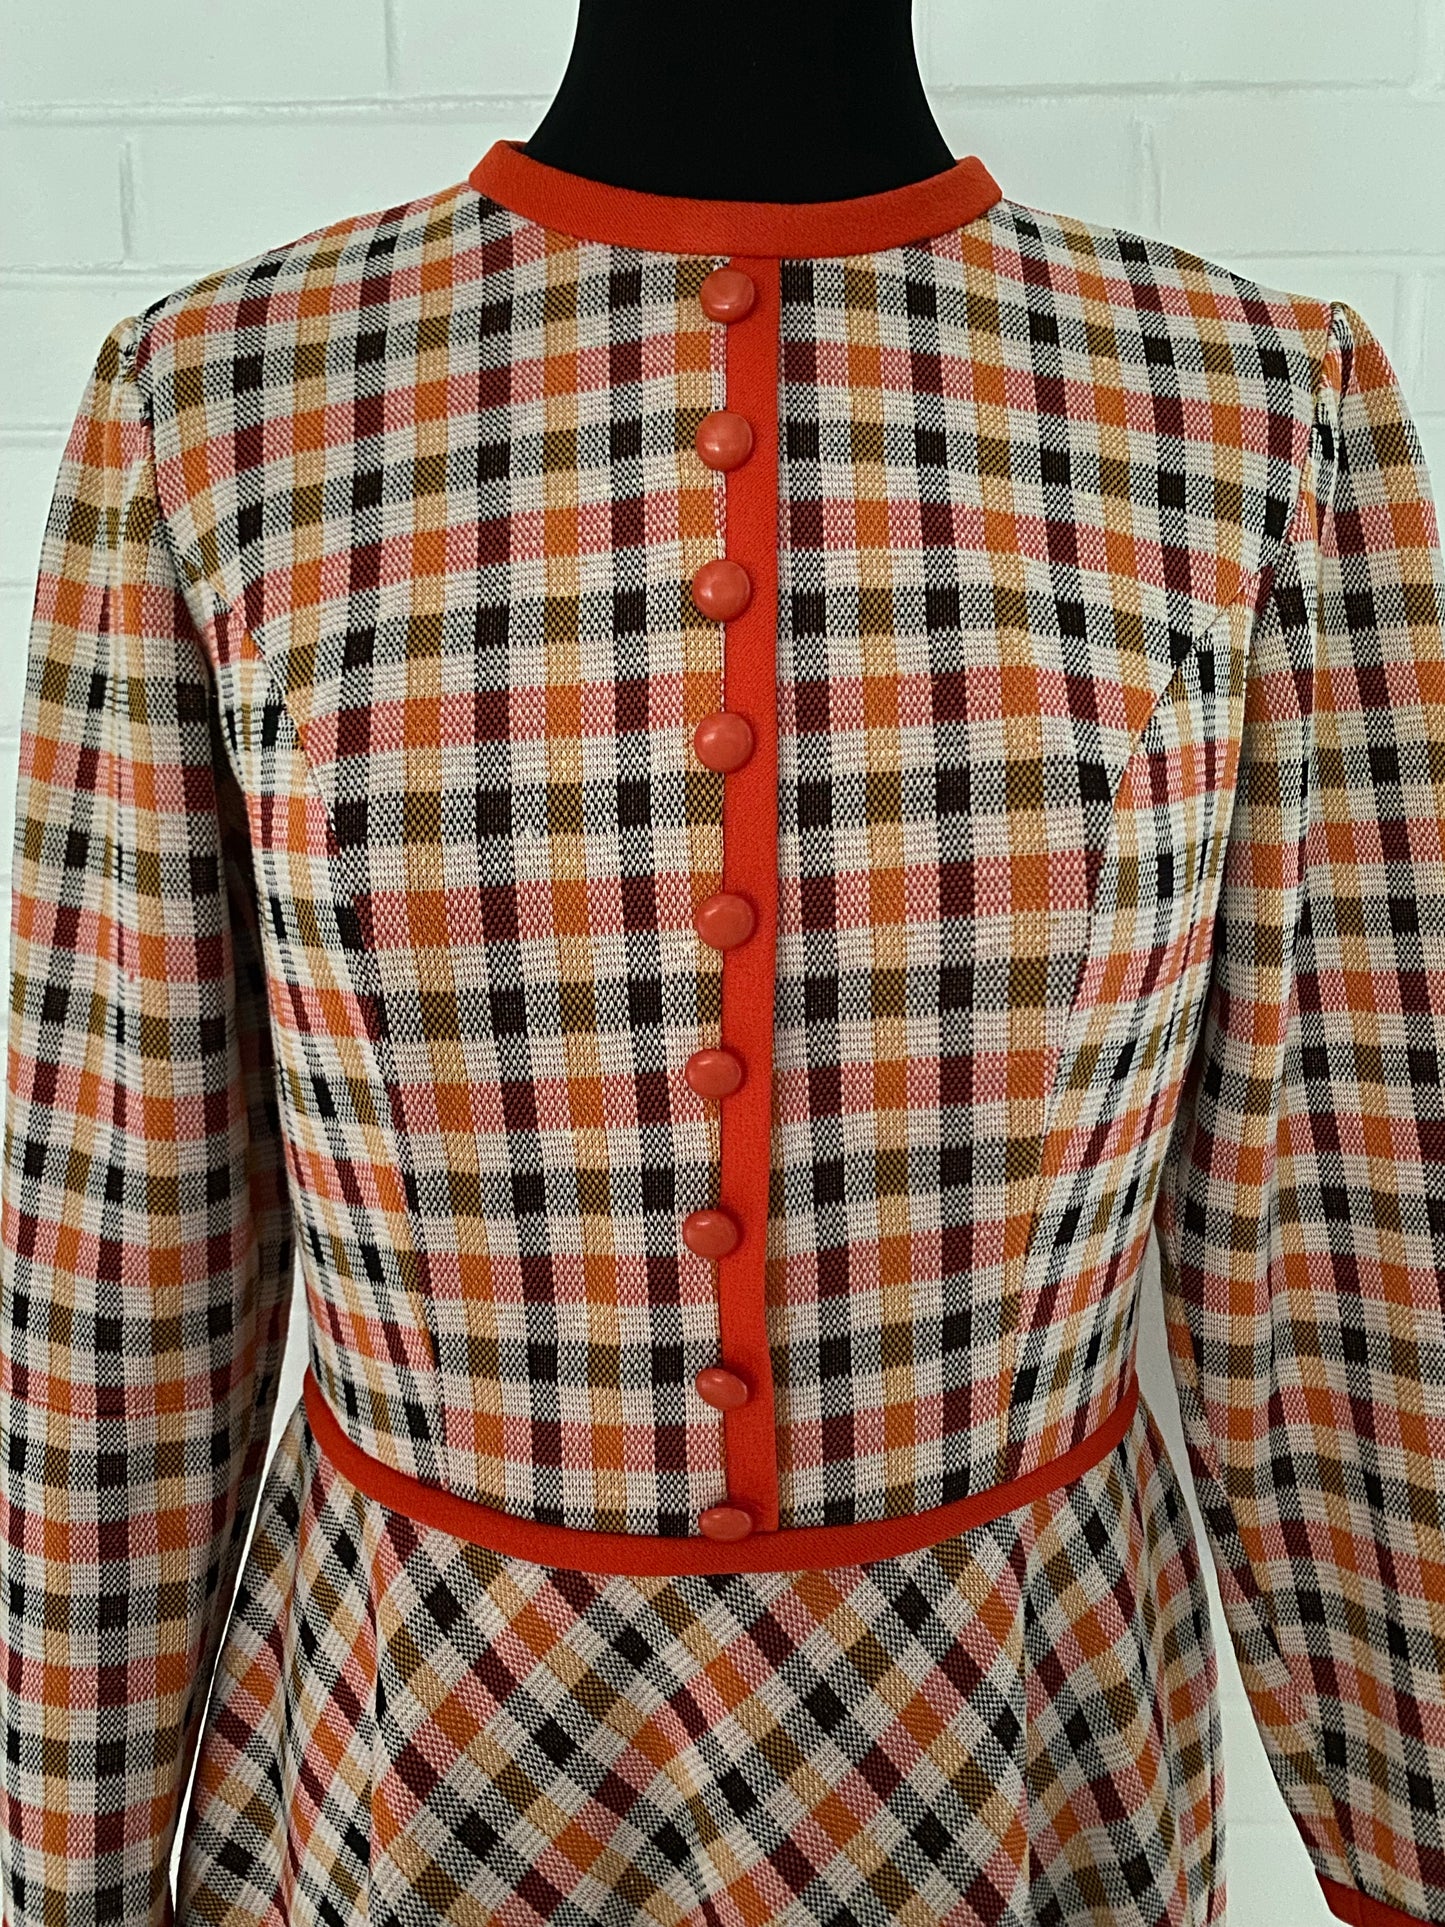 Late 60s/ Early 70s Bayberry Plaid Dress